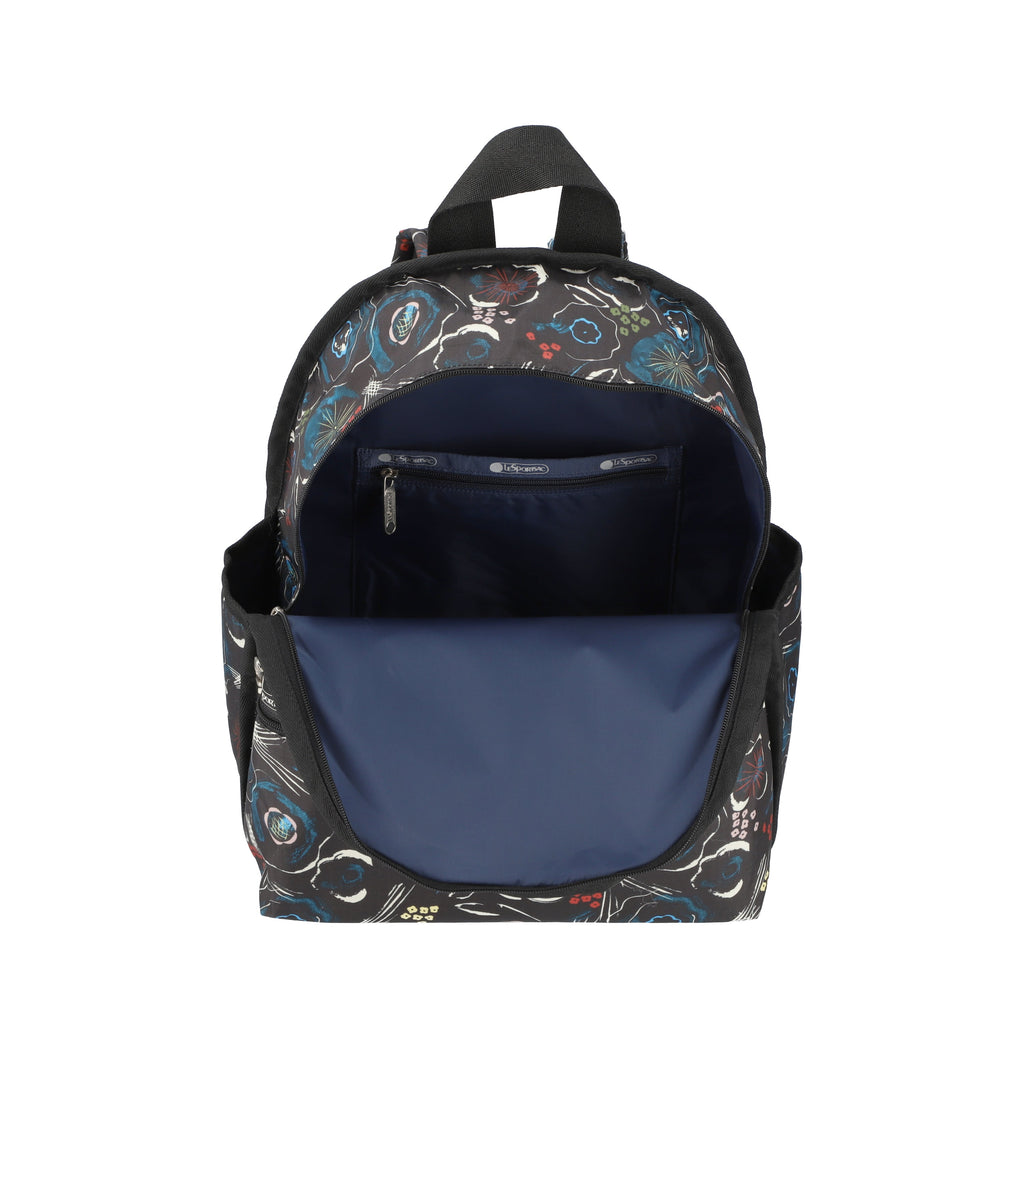 The Basic Backpack | Durable, Water-Resistant Backpacks by LeSportsac